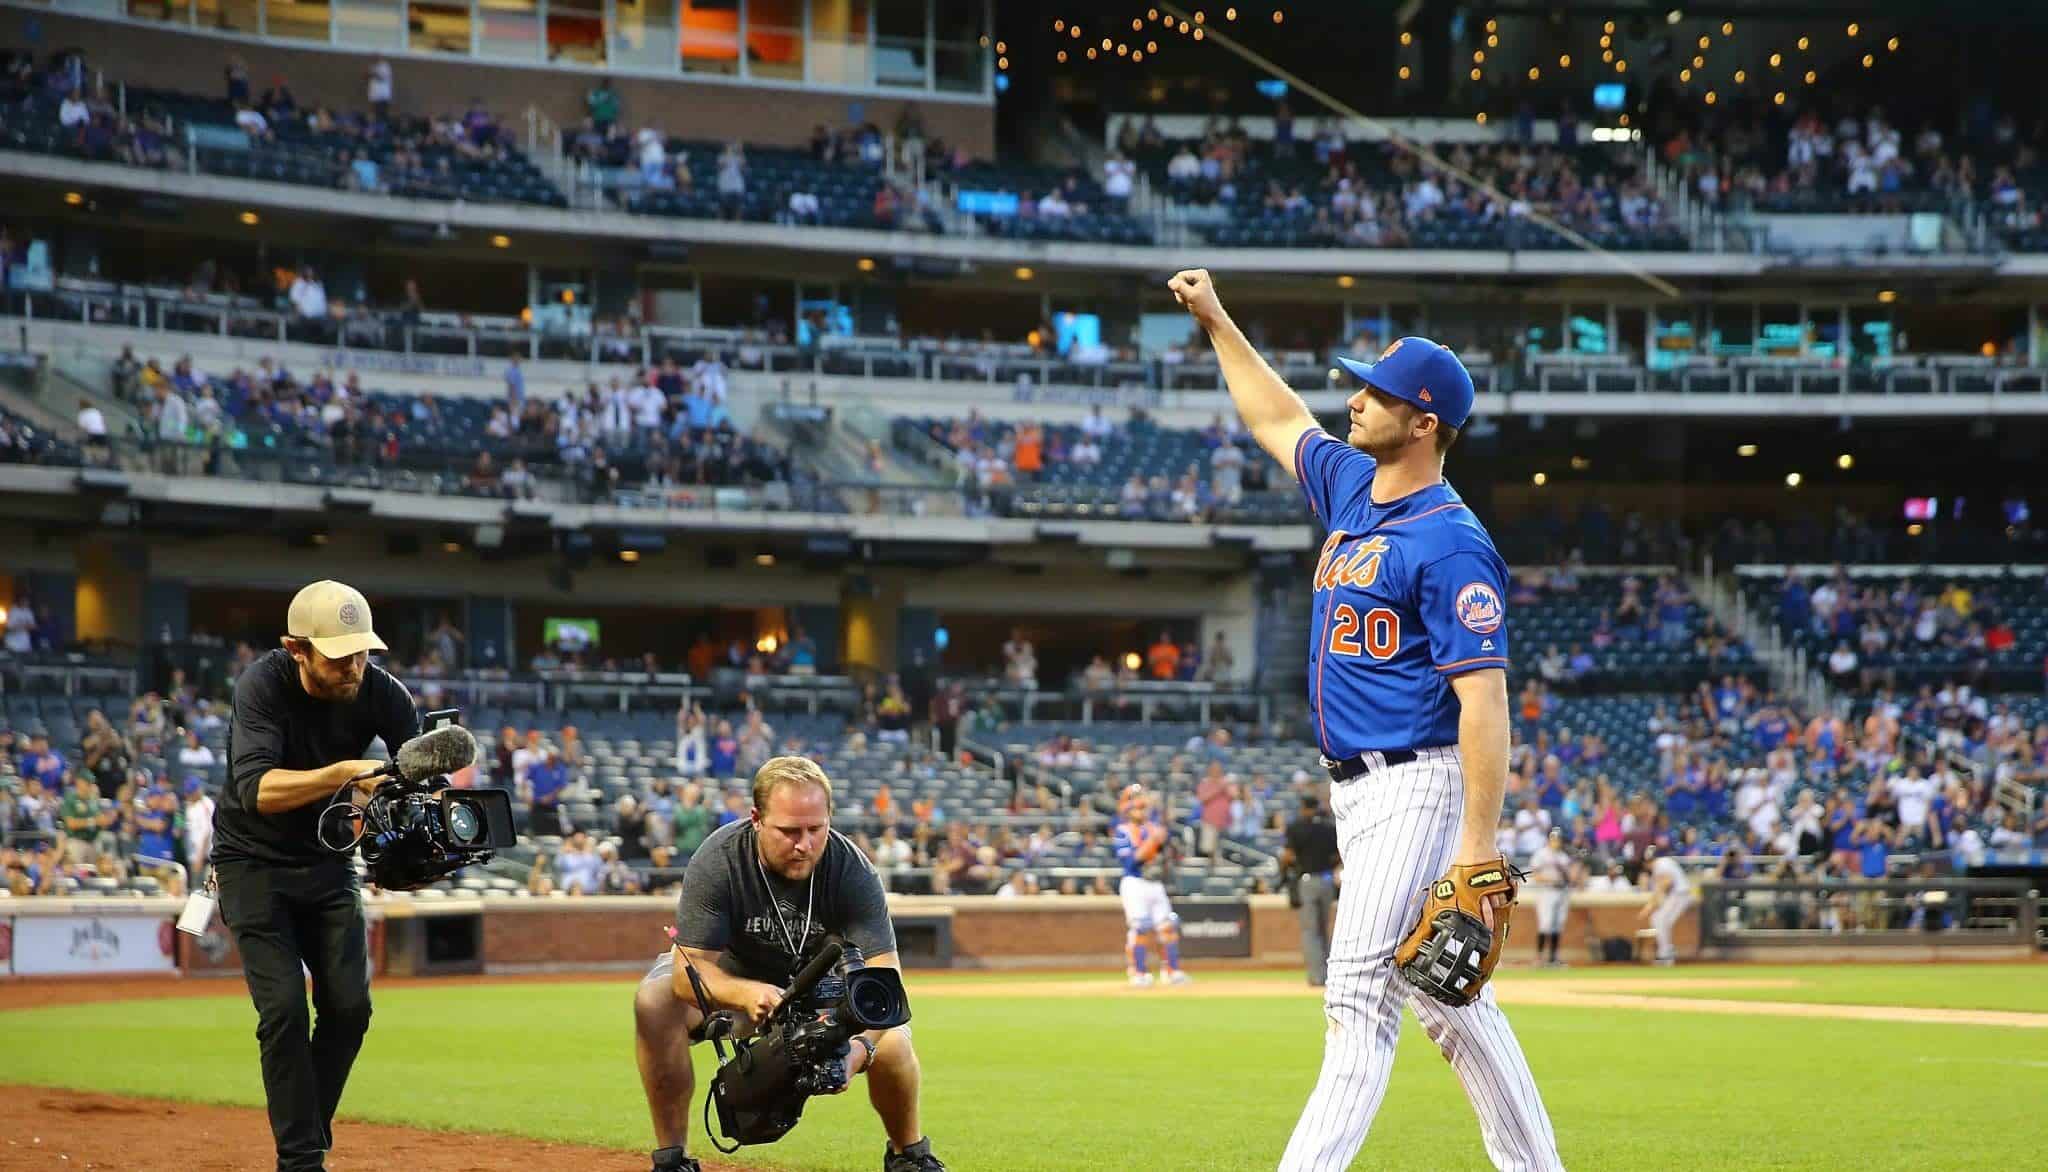 NEW YORK, NEW YORK - SEPTEMBER 29: Pete Alonso #20 of the New York Mets waves to the crowd as he exits the game in the eleventh inning against the Atlanta Braves at Citi Field on September 29, 2019 in New York City.